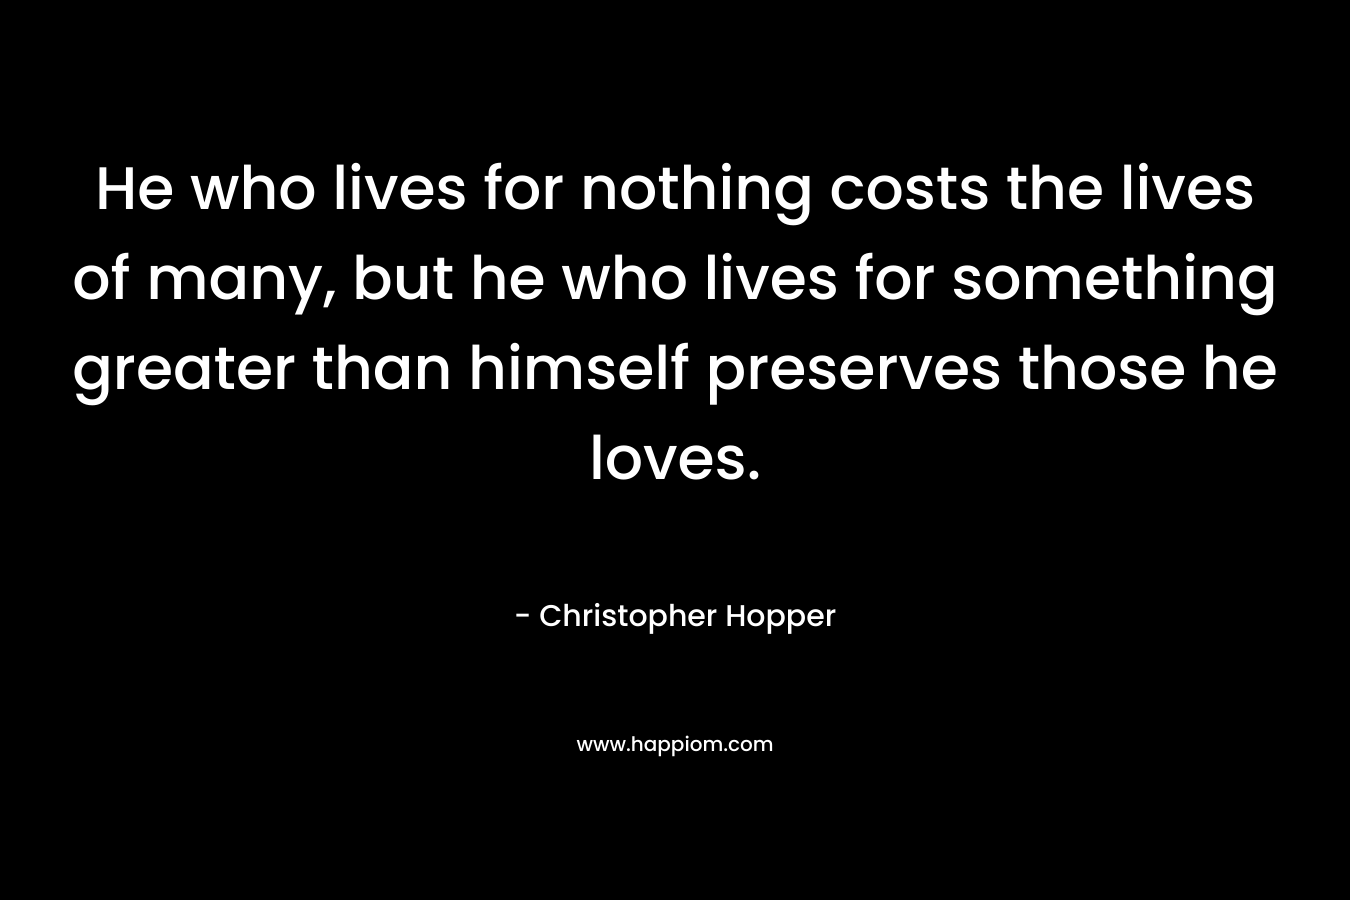 He who lives for nothing costs the lives of many, but he who lives for something greater than himself preserves those he loves.